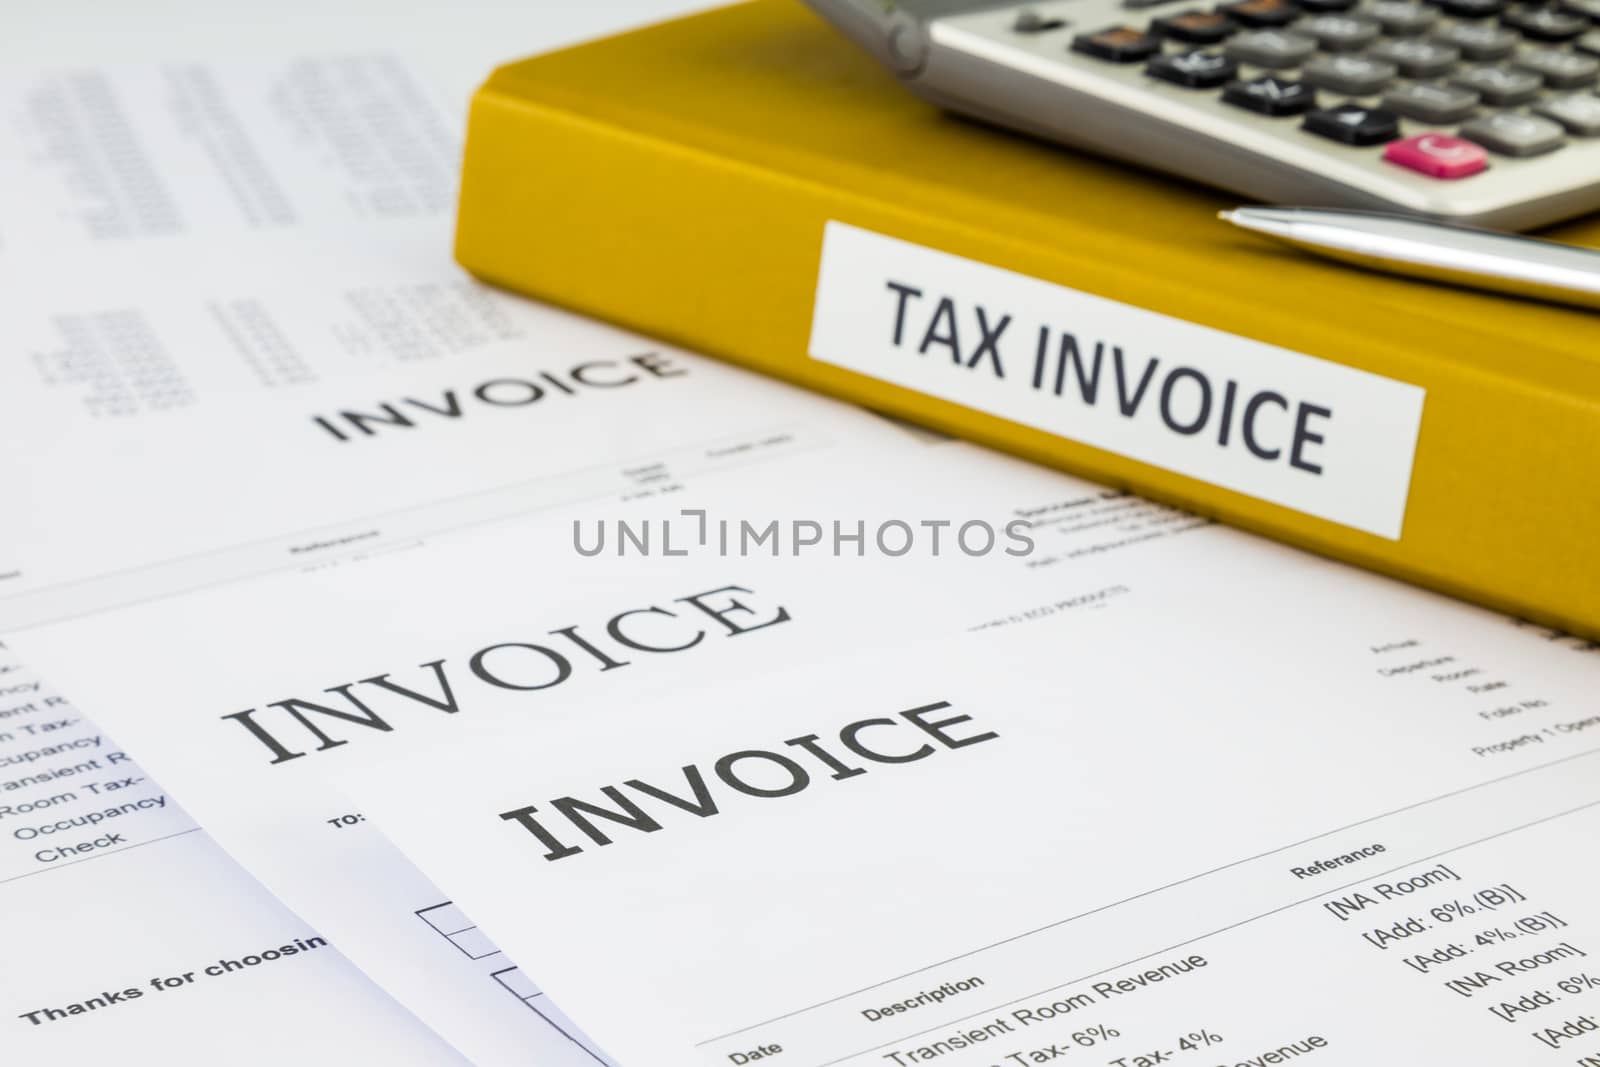 Bills, Tax invoice and Purchase orders by vinnstock